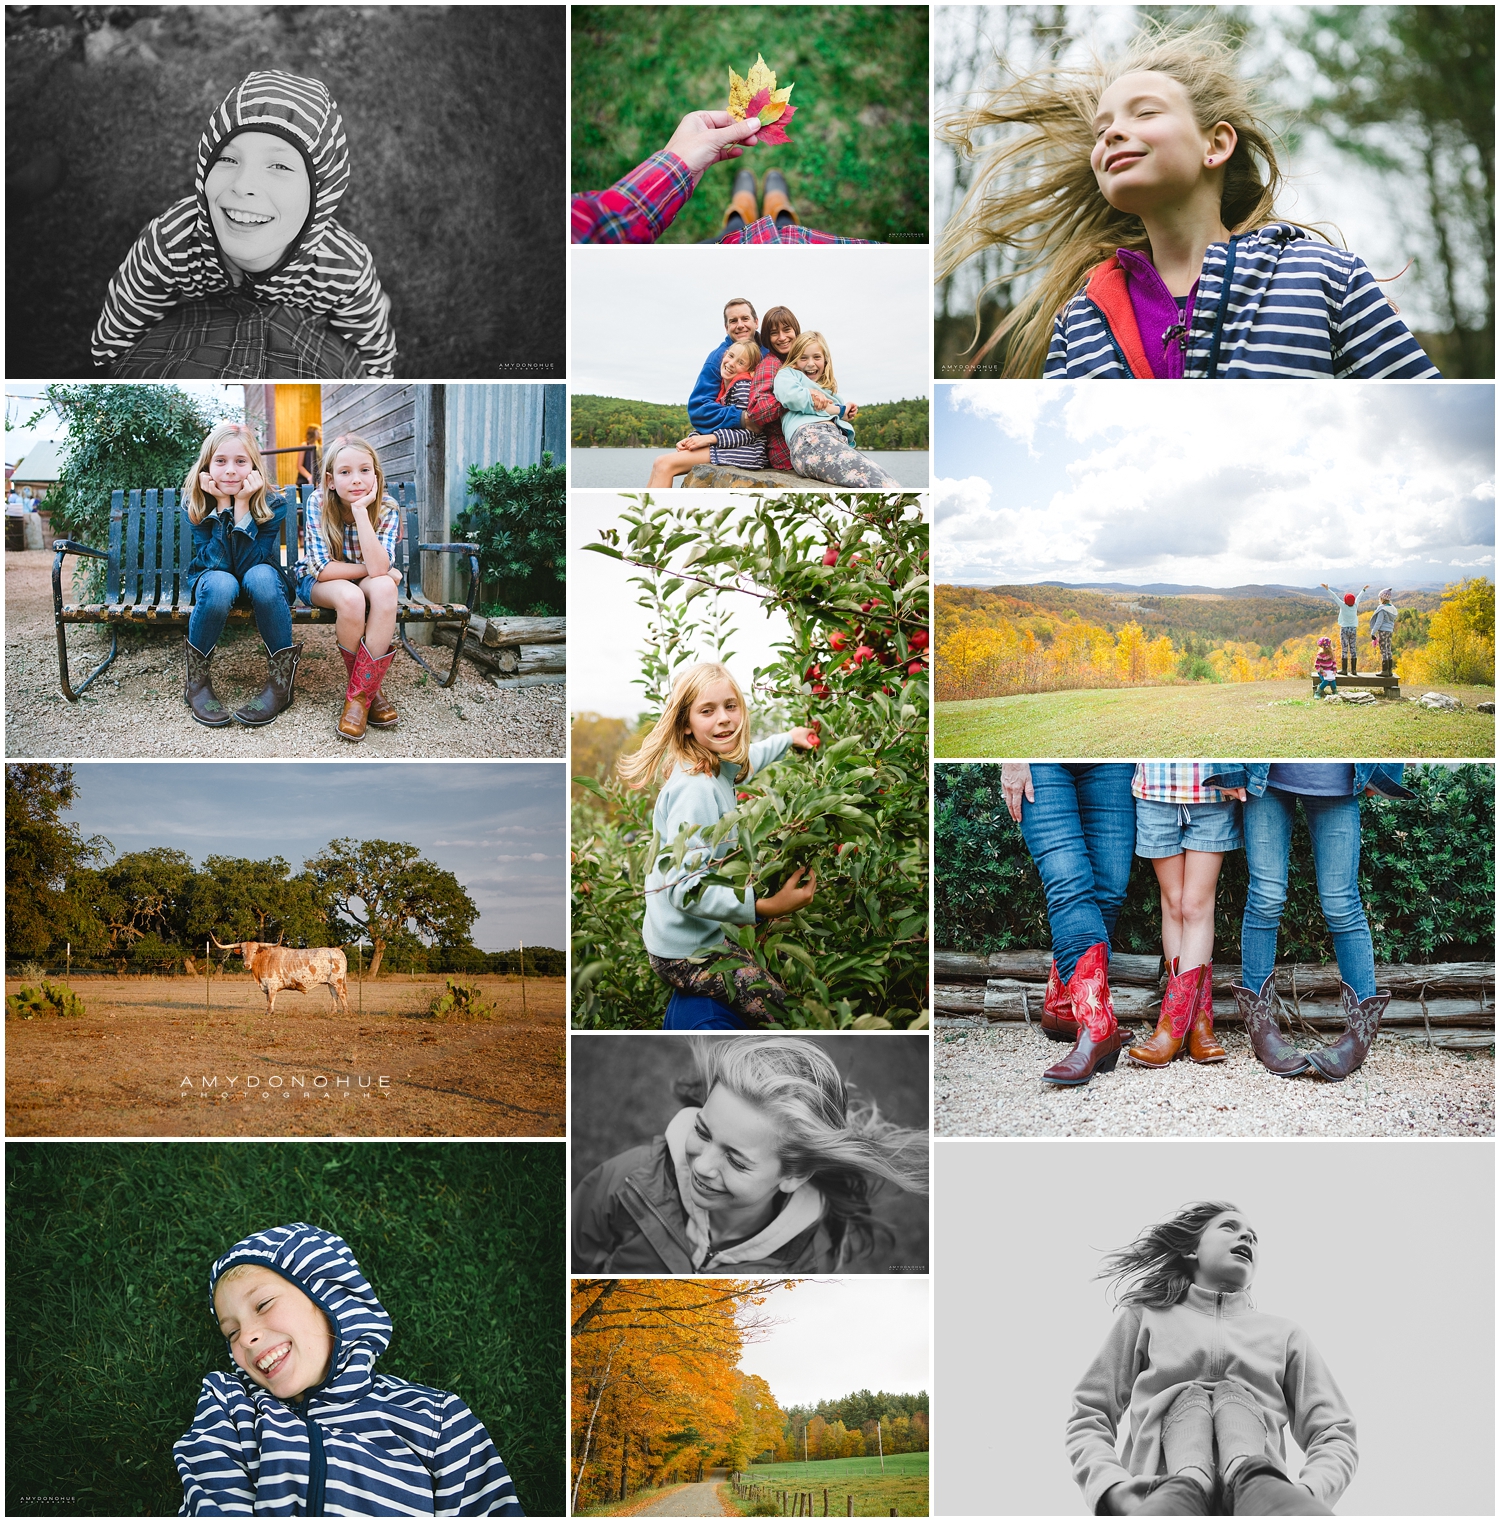 Vermont Family Photographer | Amy Donohue Photography_0237